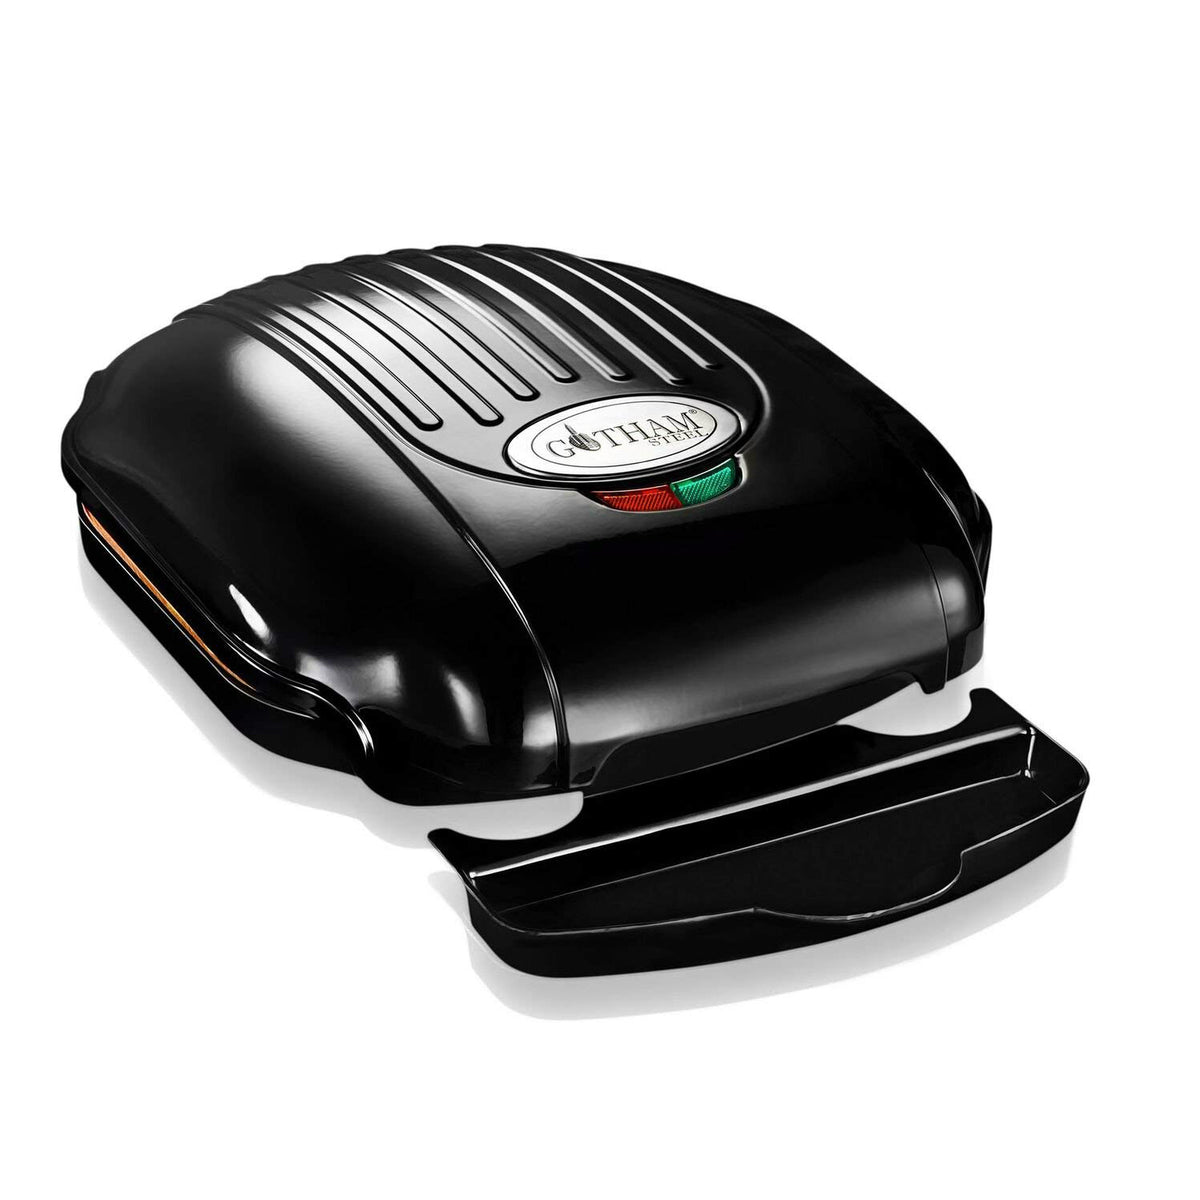 Gotham Steel 2053 Electric Grill with Non-Stick Plates, As Seen On TV